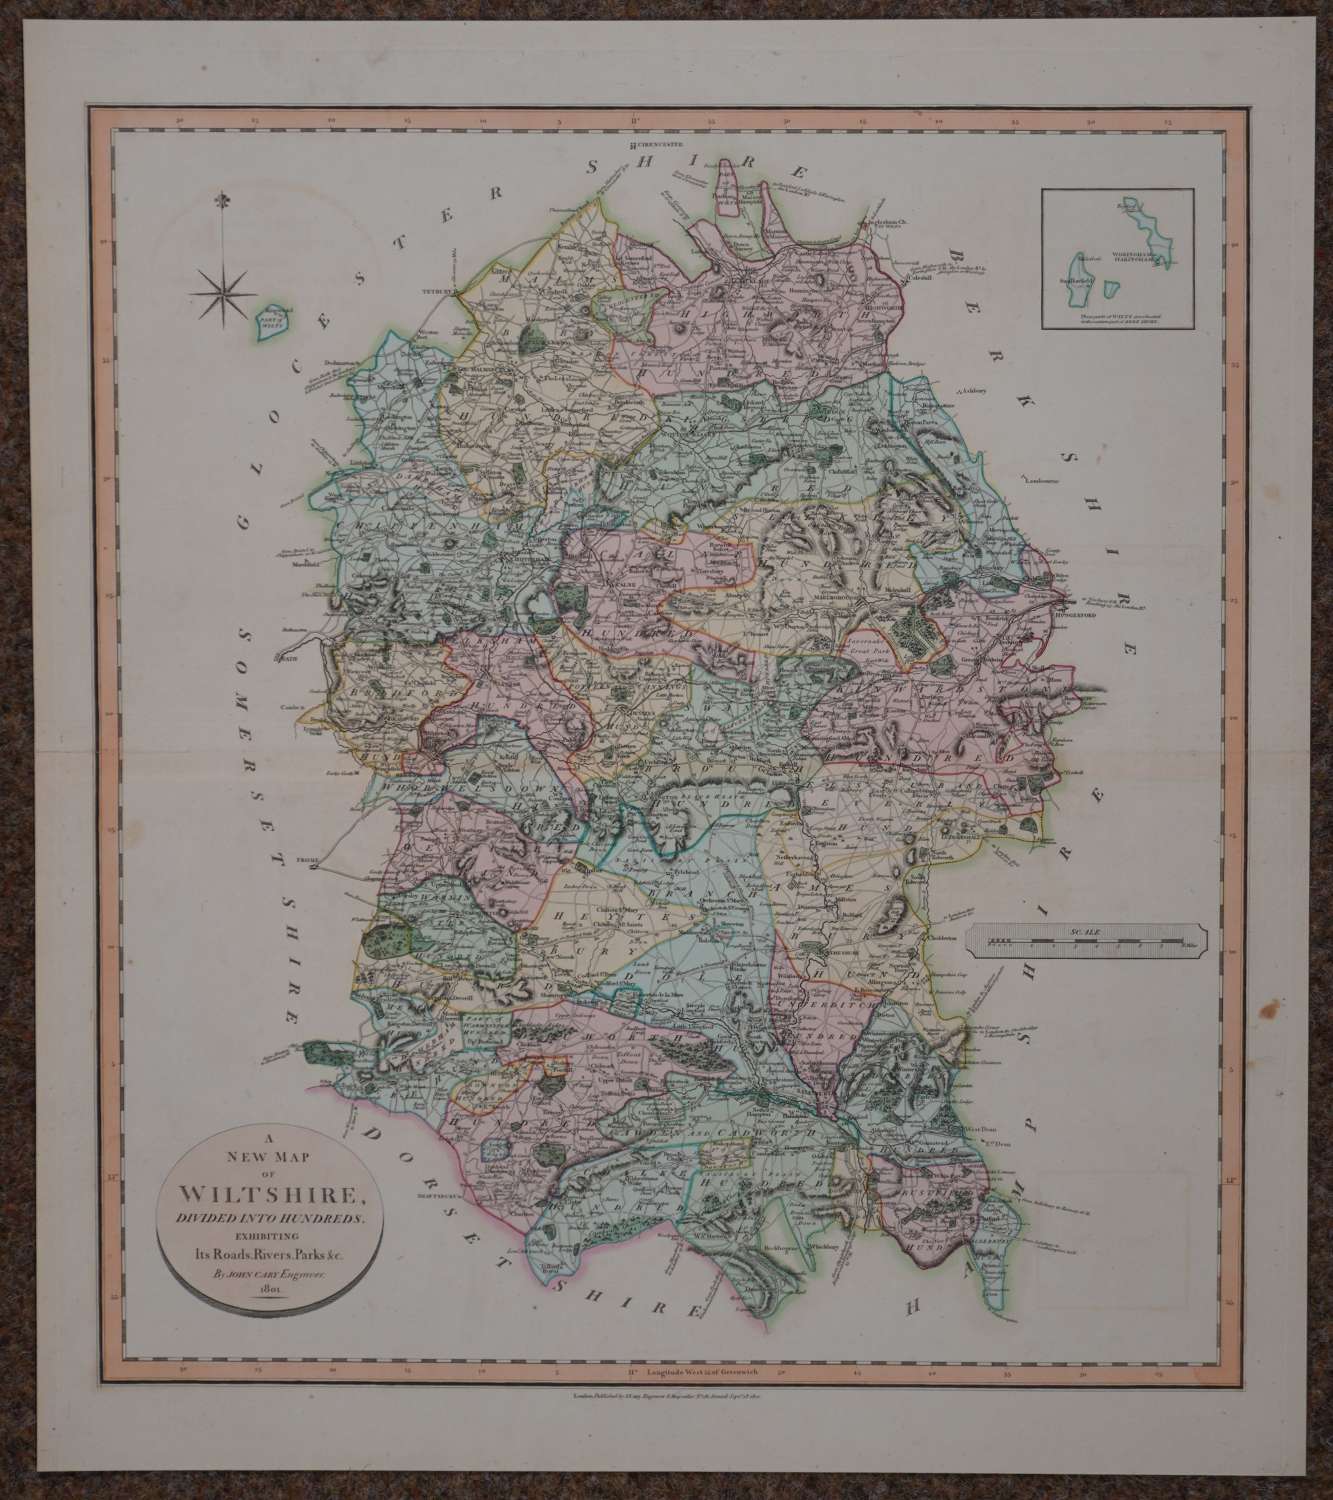 A New Map of Wiltshire by John Cary